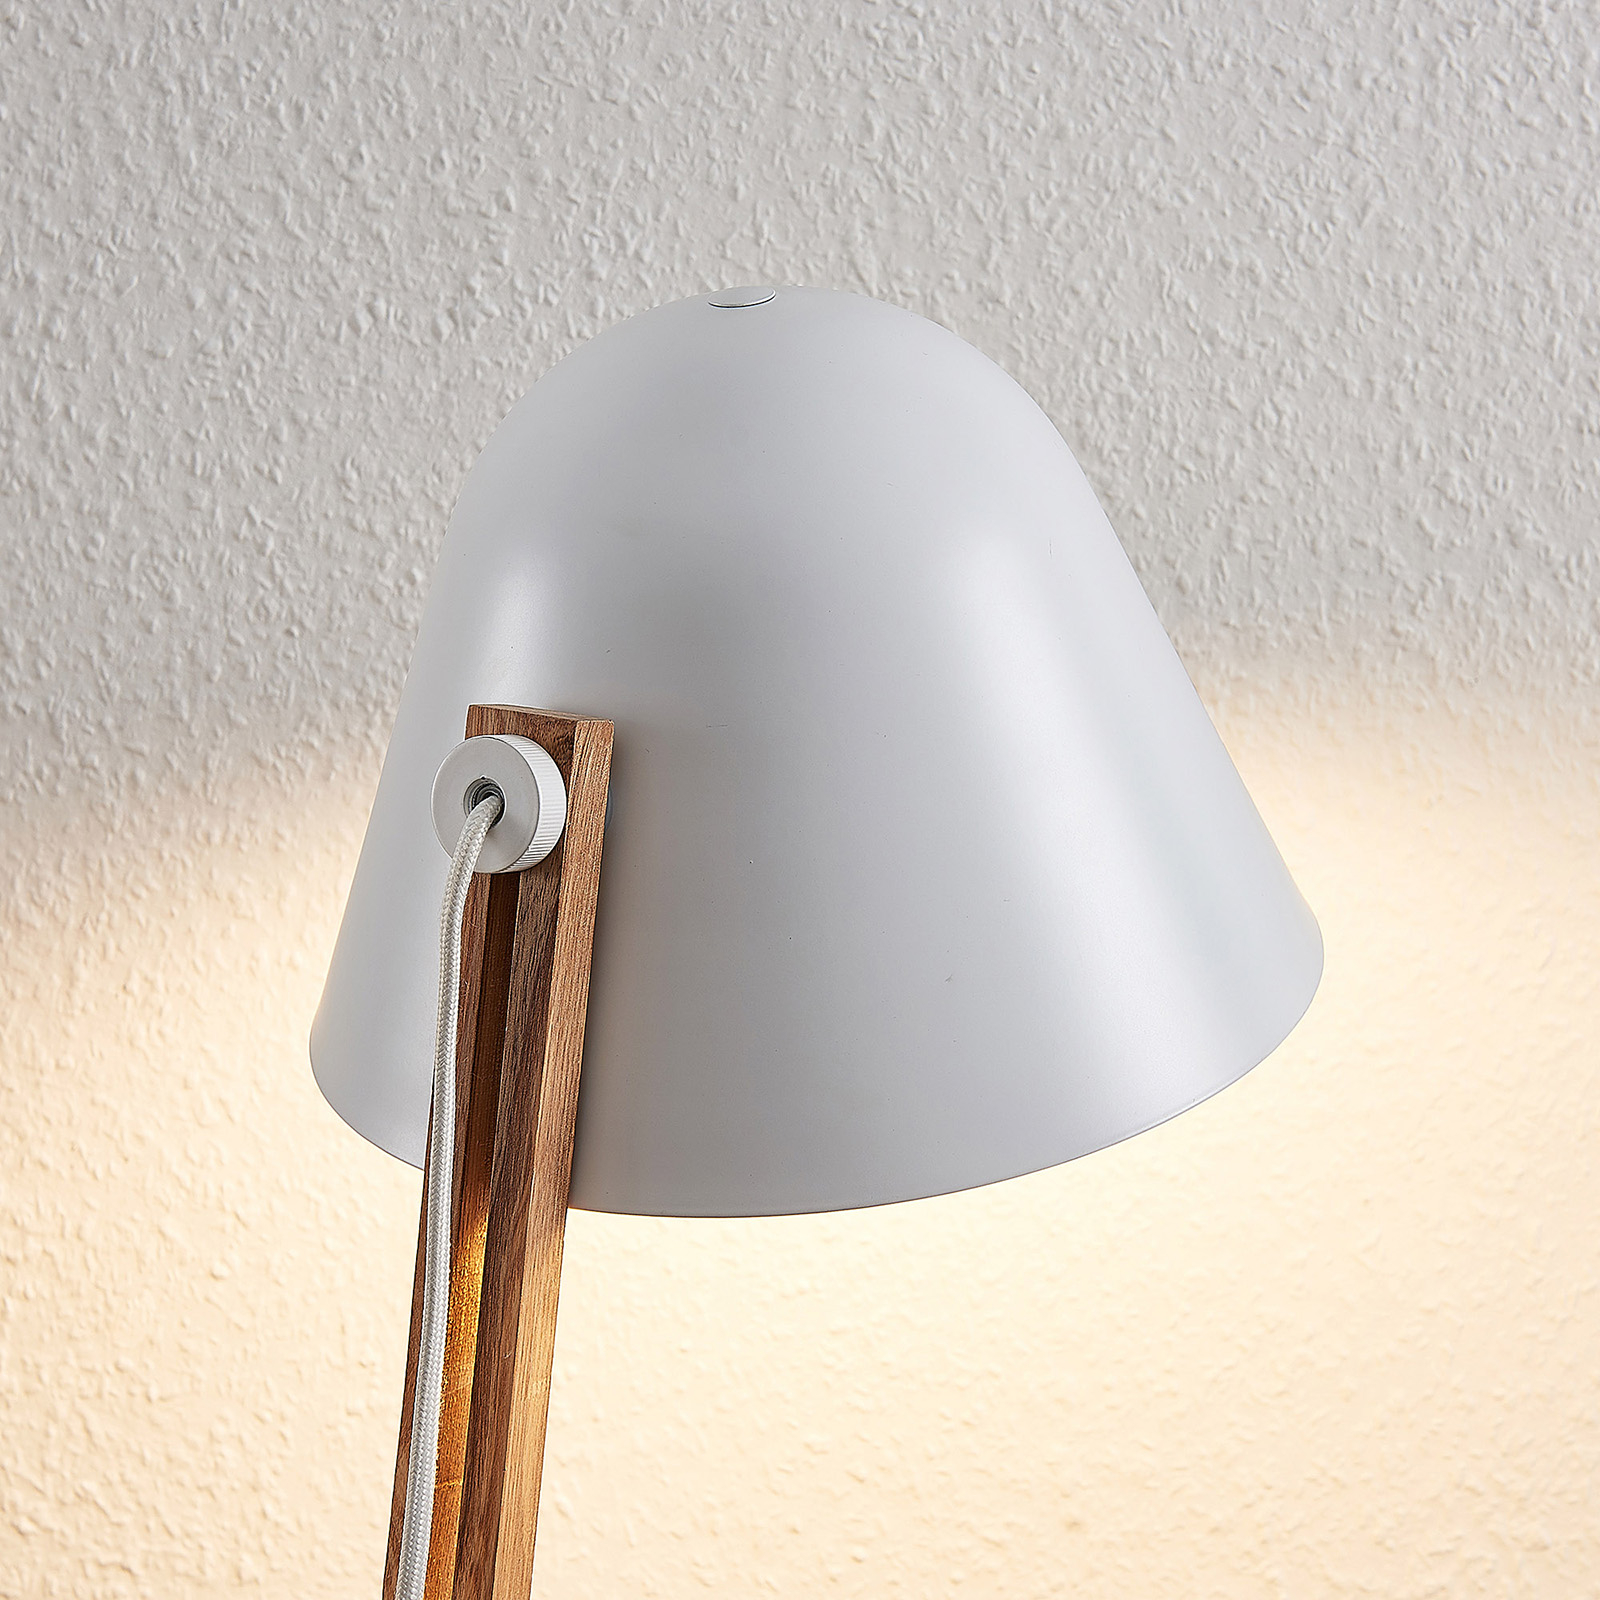 Lindby Tetja floor lamp with a wooden rod